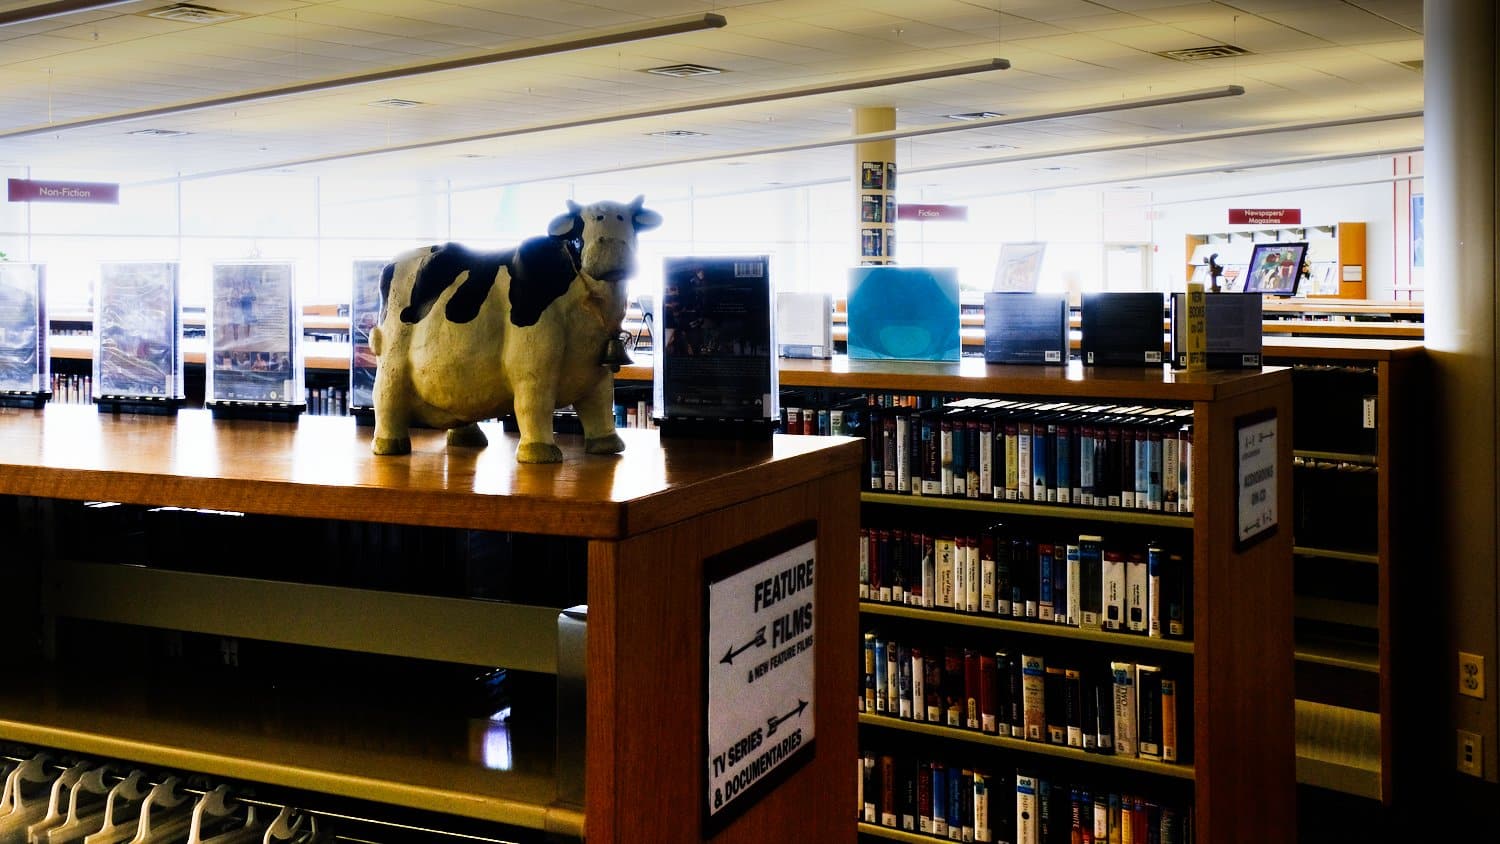 Video section of the library.